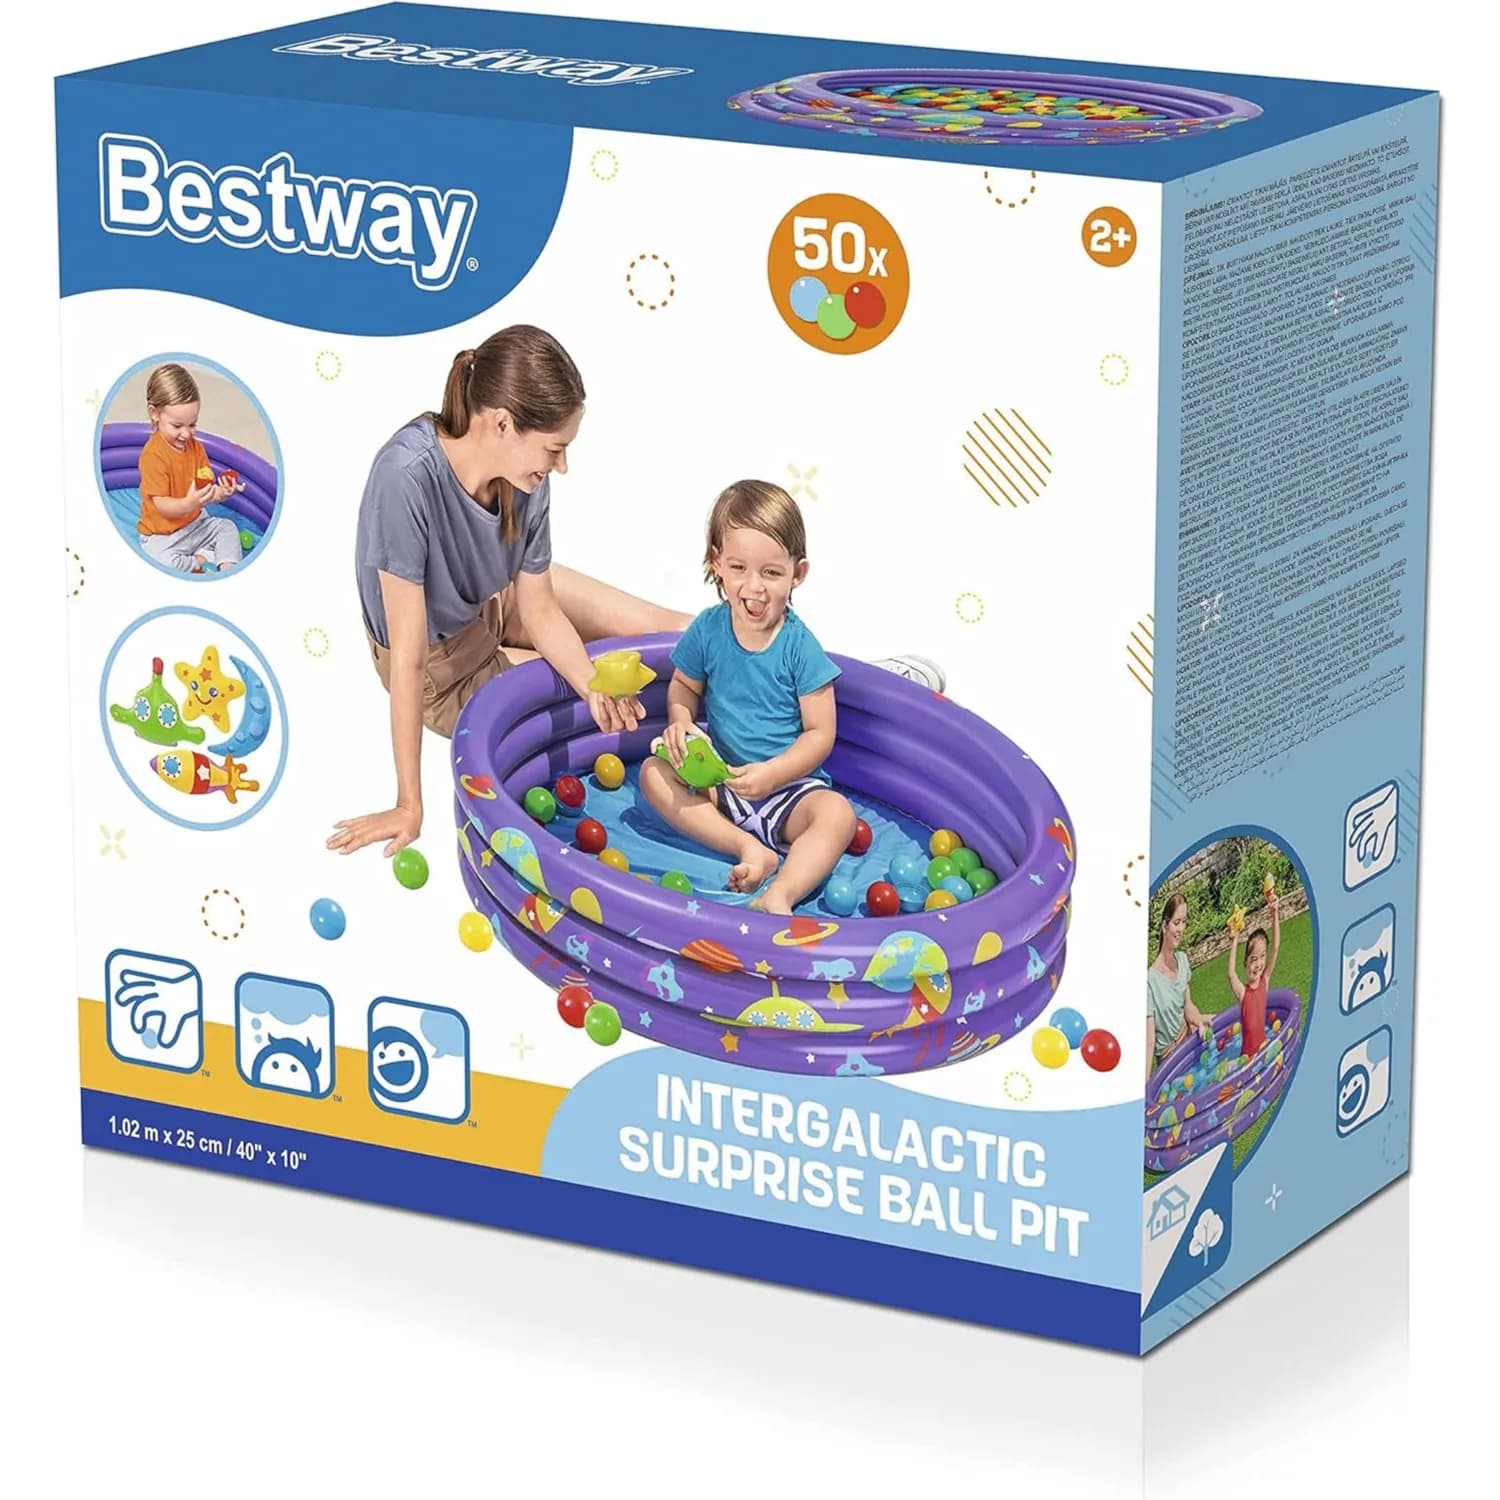 Bestway Inflatable pool with balls Intergalactic 1.02m x 25cm For Kids - POLT104